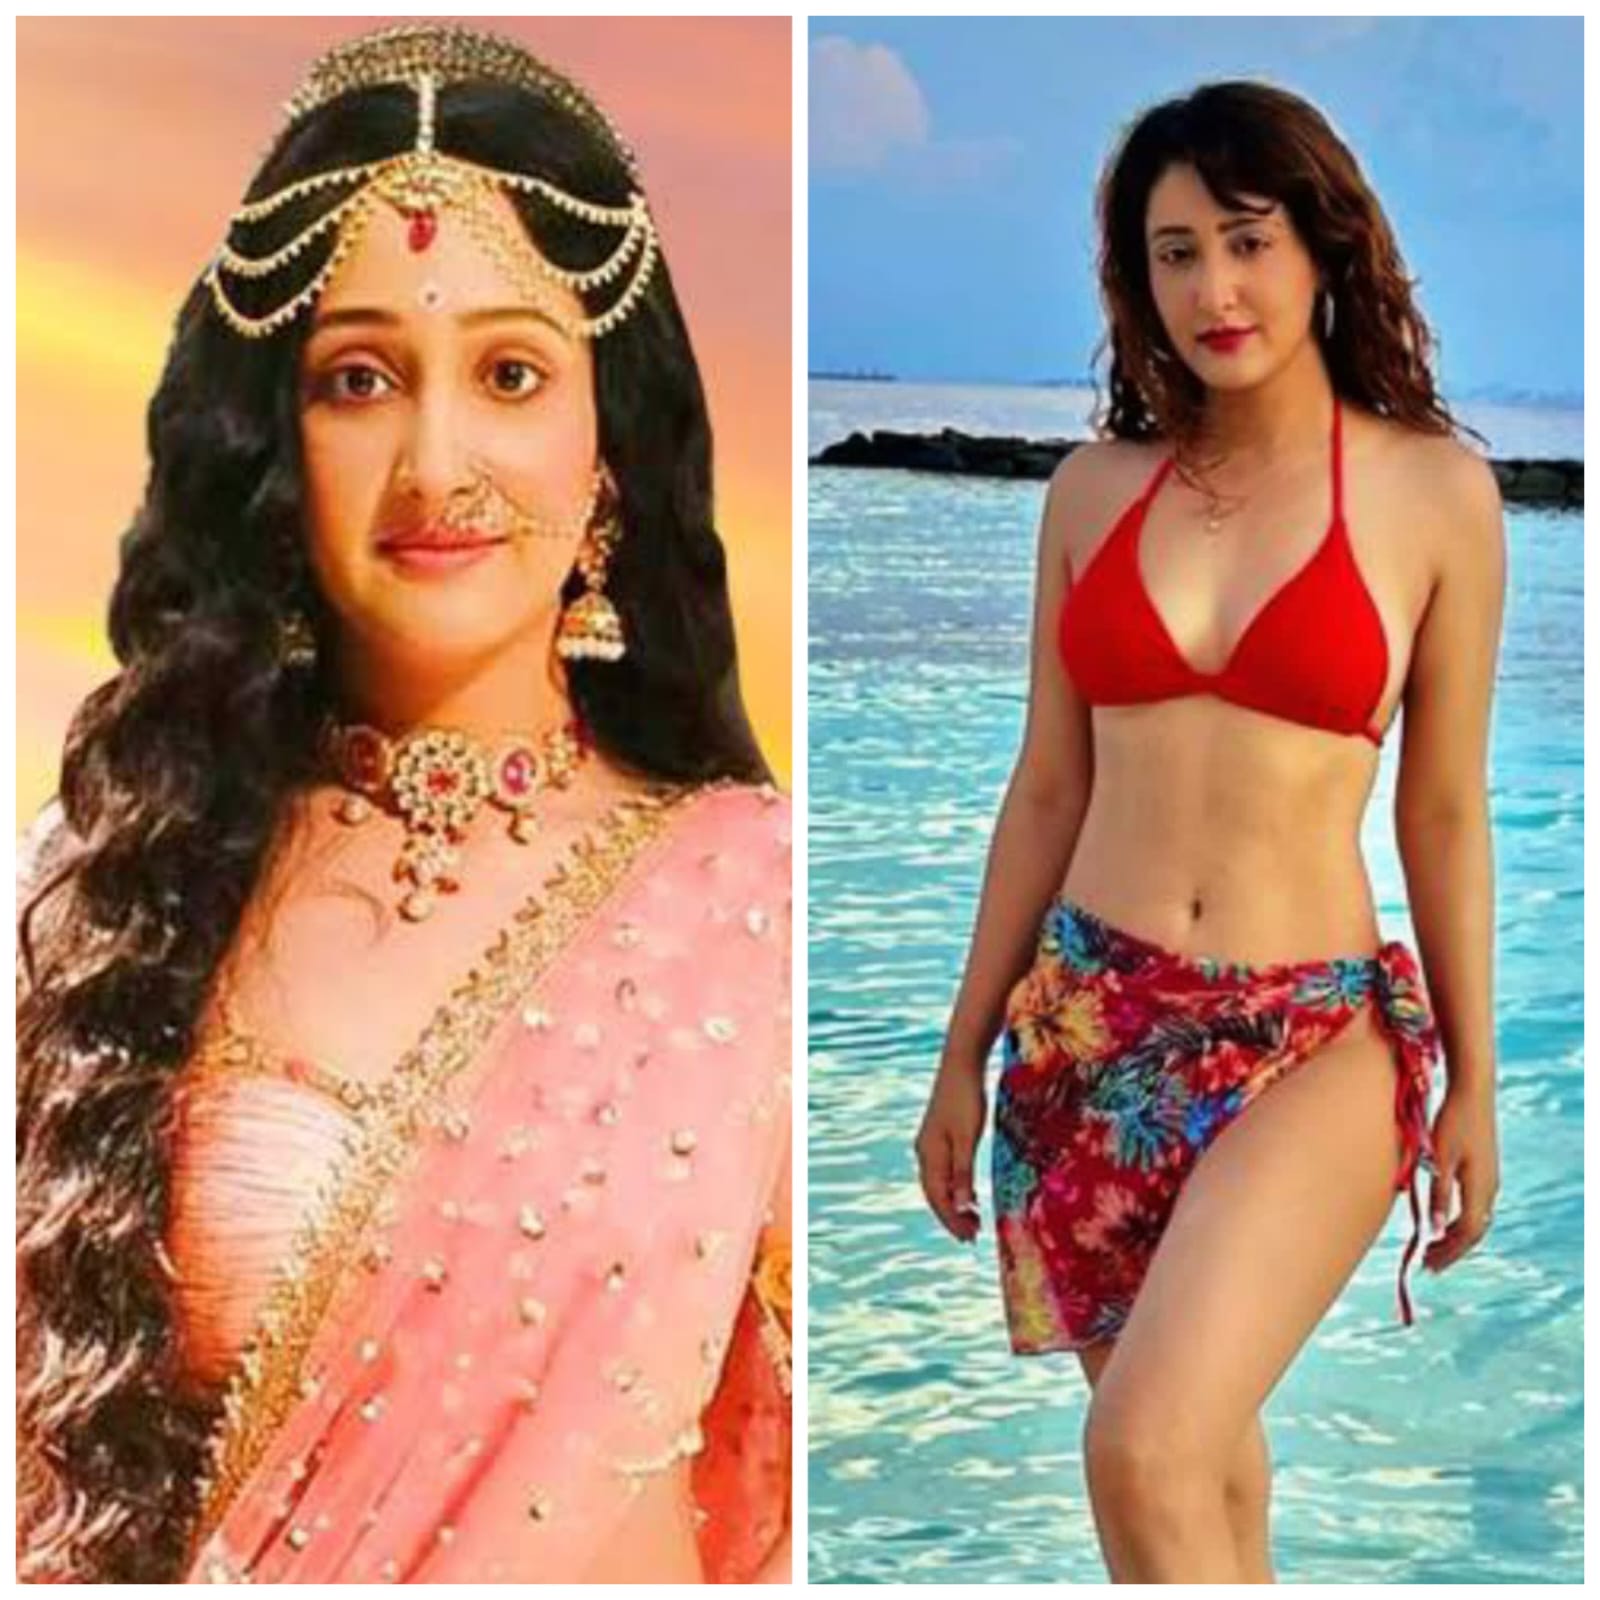 Shivya Pathania who plays mythological characters on TV gives it back to the trollers for trolling her for wearing a bikini on Maldives vacation says, Isn’t it normal to wear a bikini on a beach?